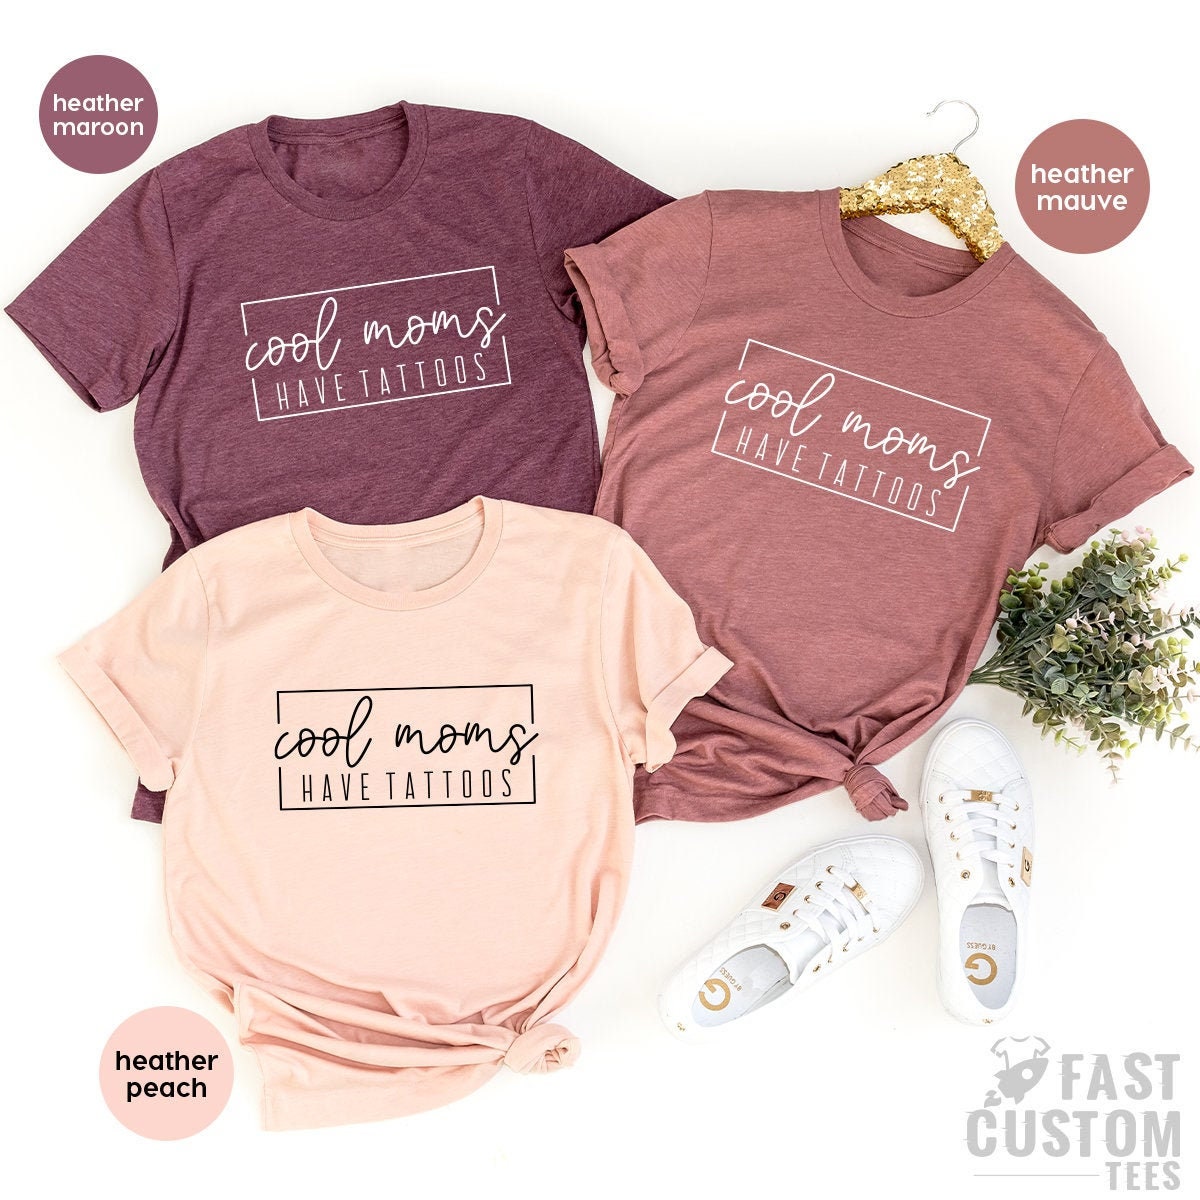 Cool Moms Have Tattoos Shirt, Cool Mama Tee, Funny Mother T Shirt, Gift For Mama, Mother's Day Shirt, Cute Mom Shirt, Sassy Mom Tee - Fastdeliverytees.com